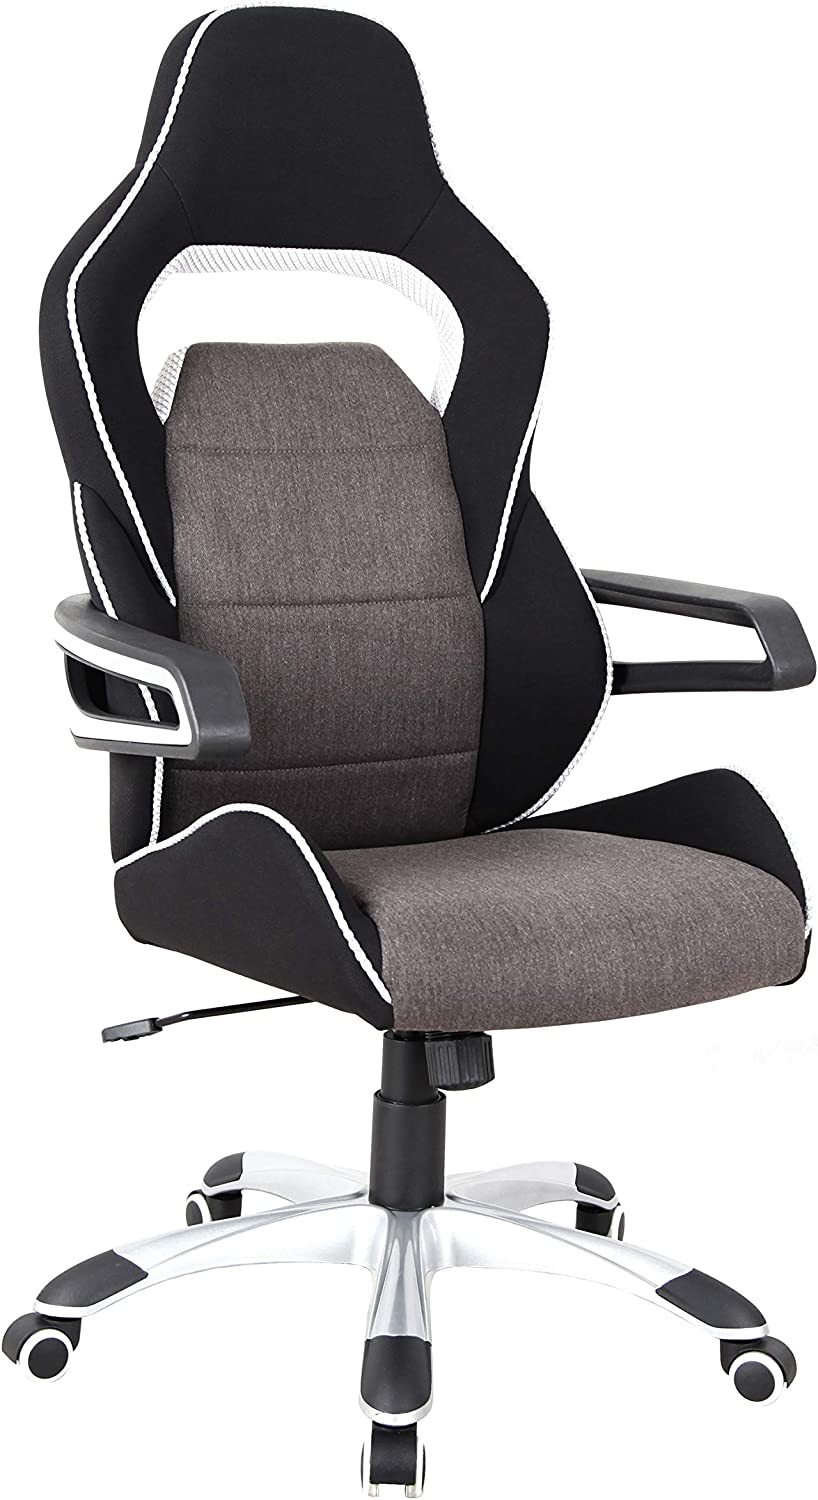 Grey Executive Ergonomic Upholstered Racing Style Home And Office Chair From - $114.96